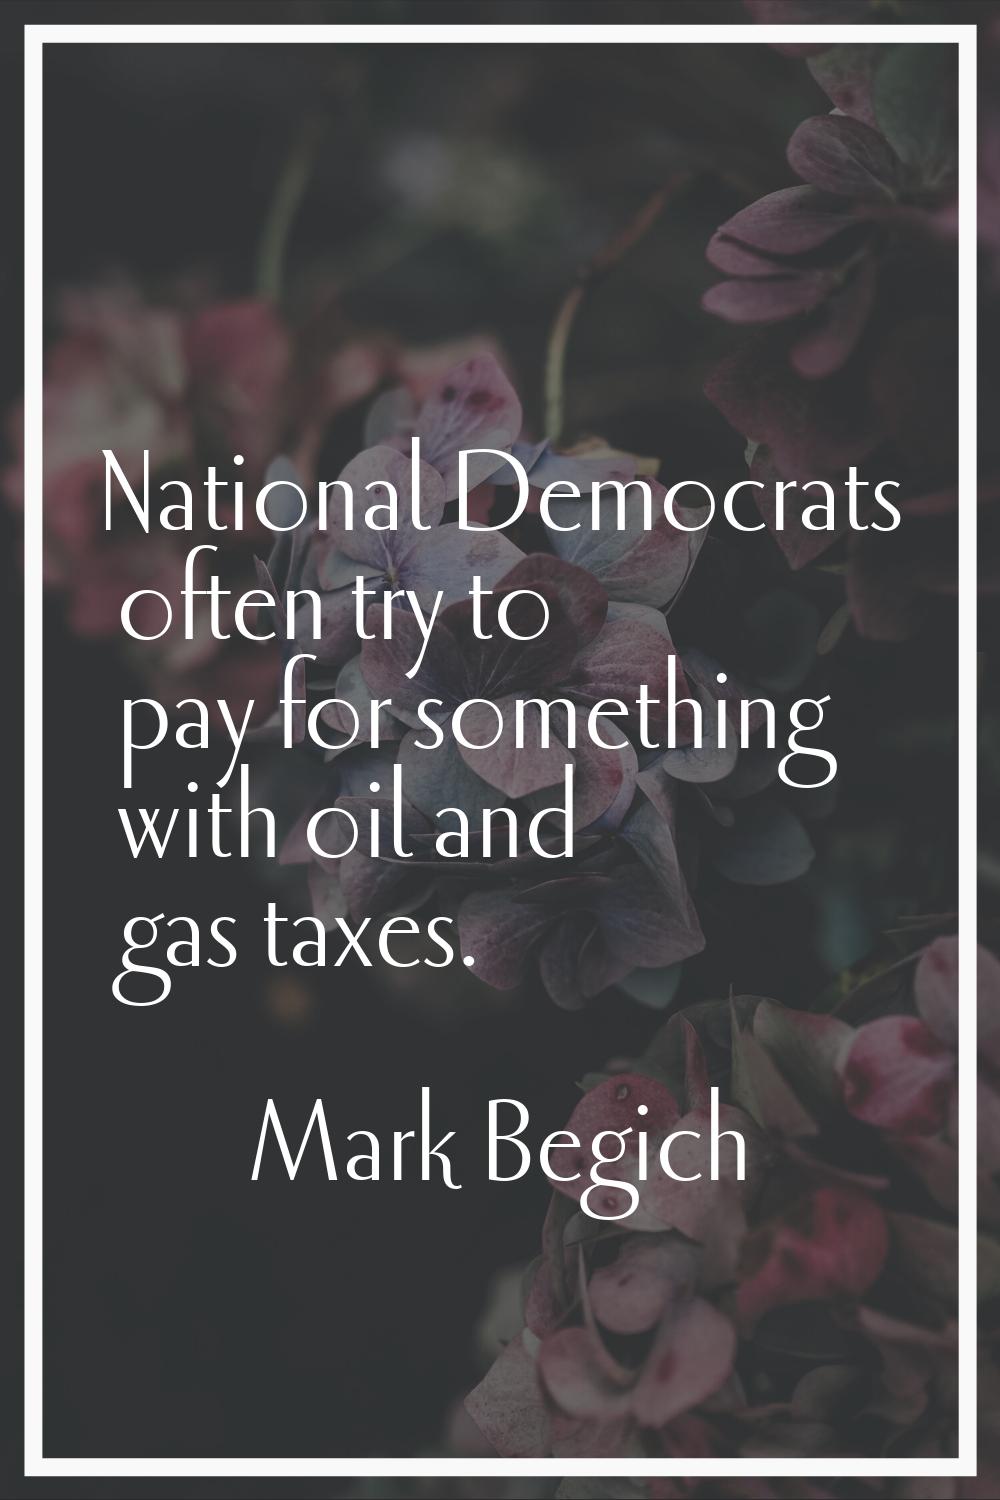 National Democrats often try to pay for something with oil and gas taxes.